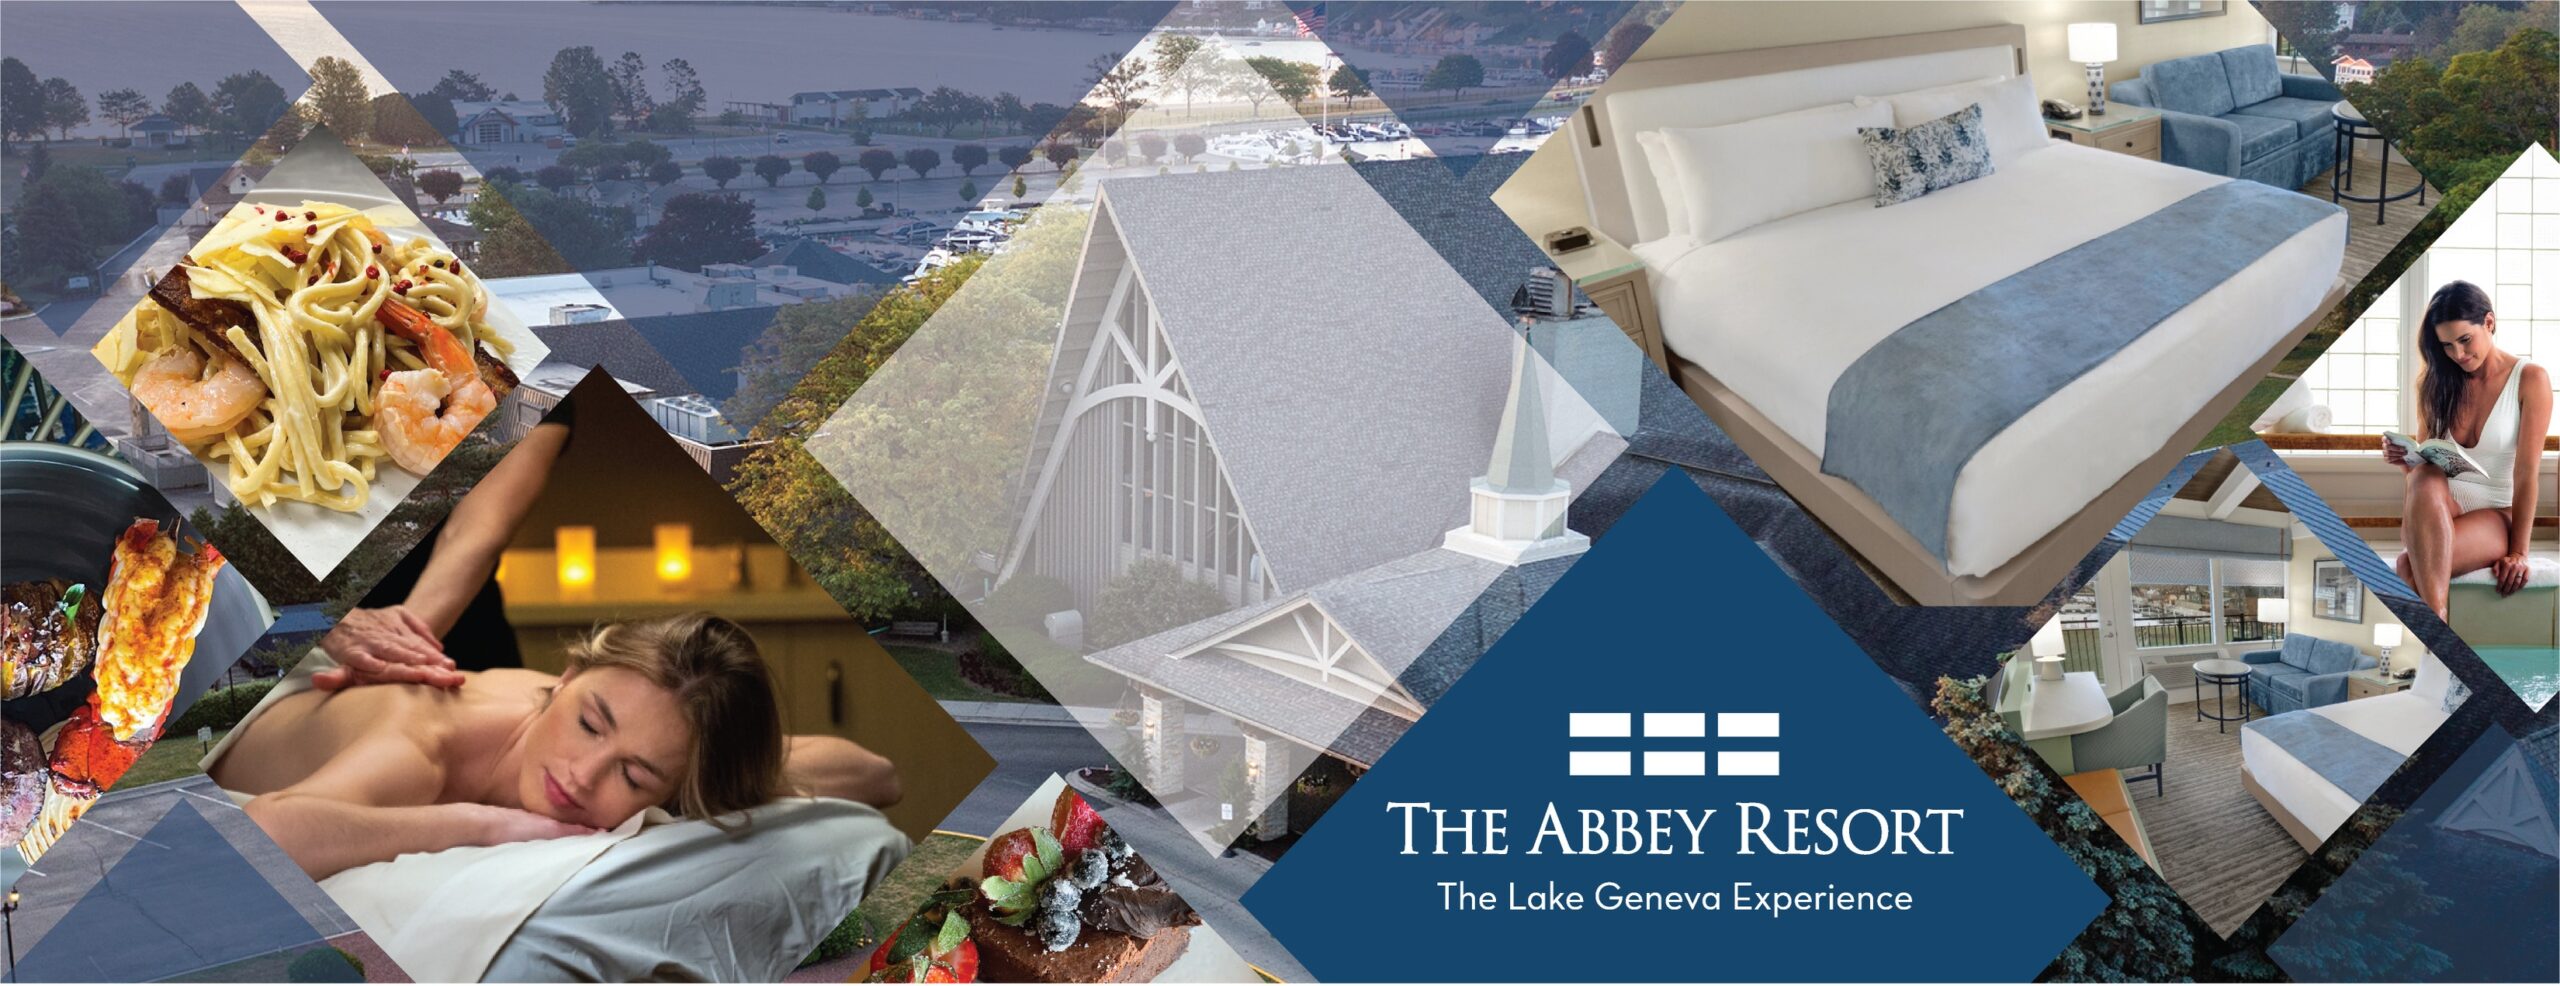 Troy Neihardt plays Grand Piano at The Abbey Resort